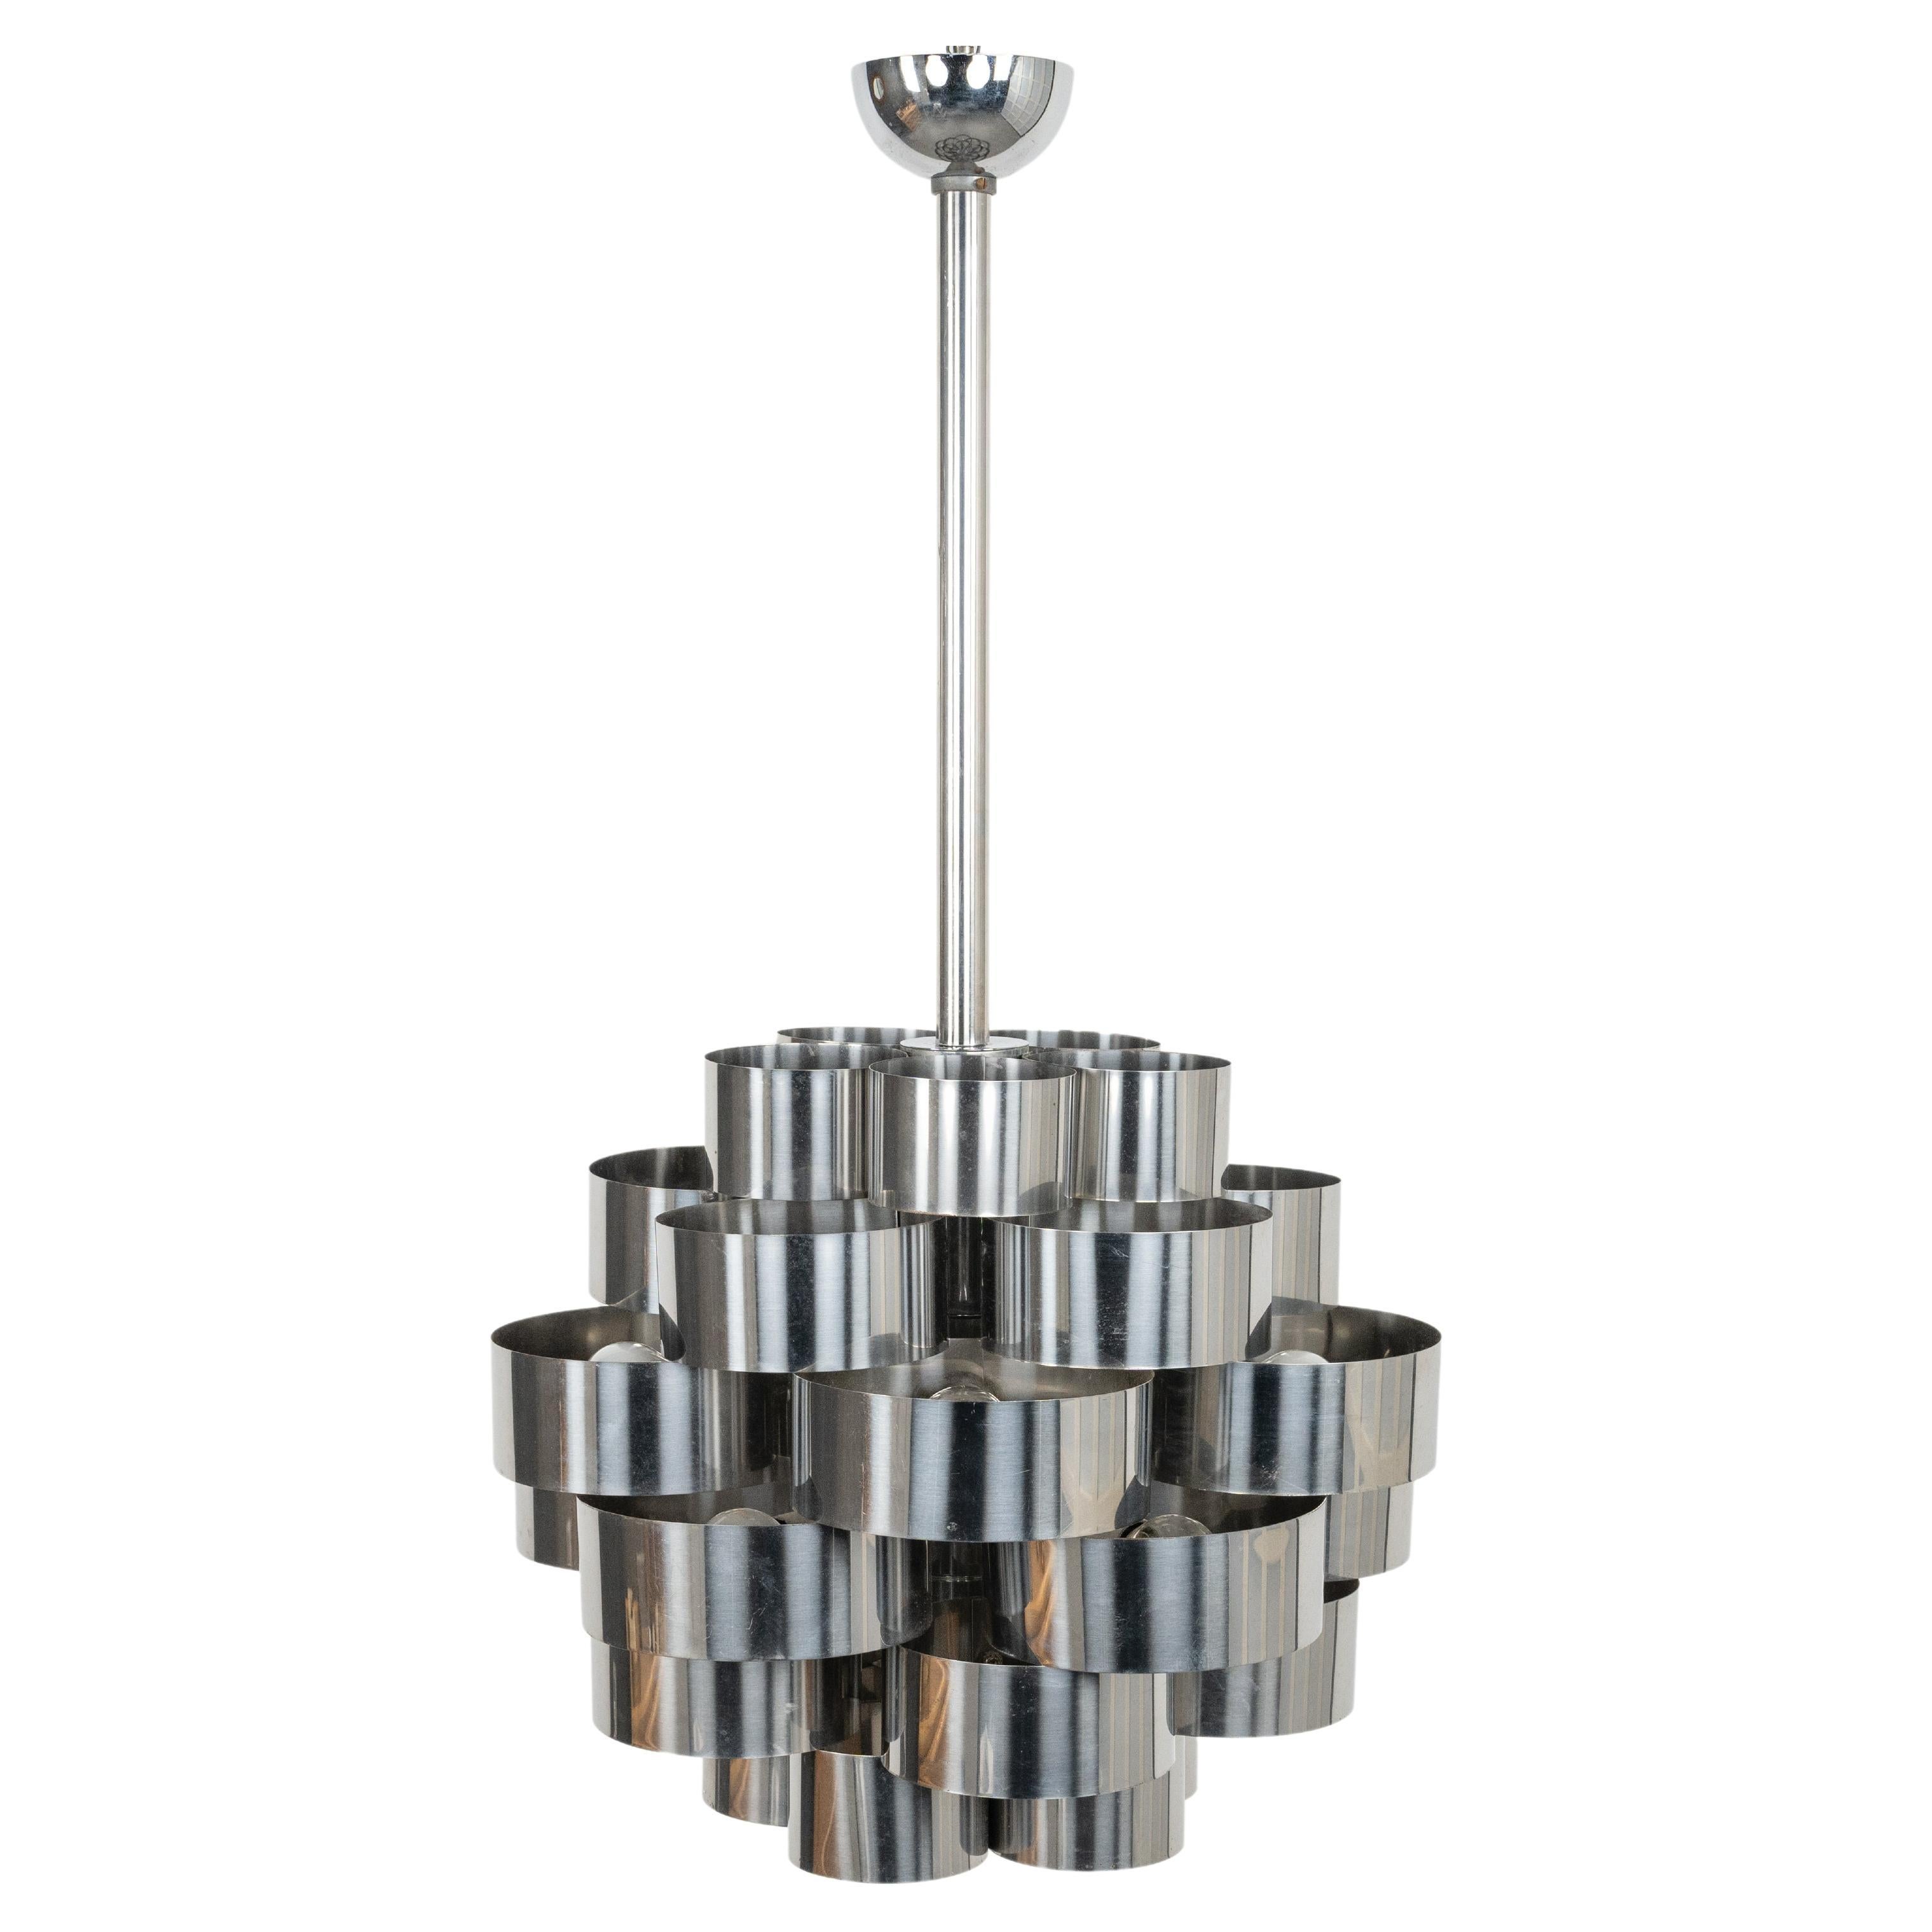 Midcentury amazing chandelier with 10 lights in steel and aluminum curved by Max Sauze for Sciolari.

Made in Italy in the 1970s.

It uses 10 bulbs attack E14, It is wired for the United States or Europe and operate on 110 or 220 Volts.